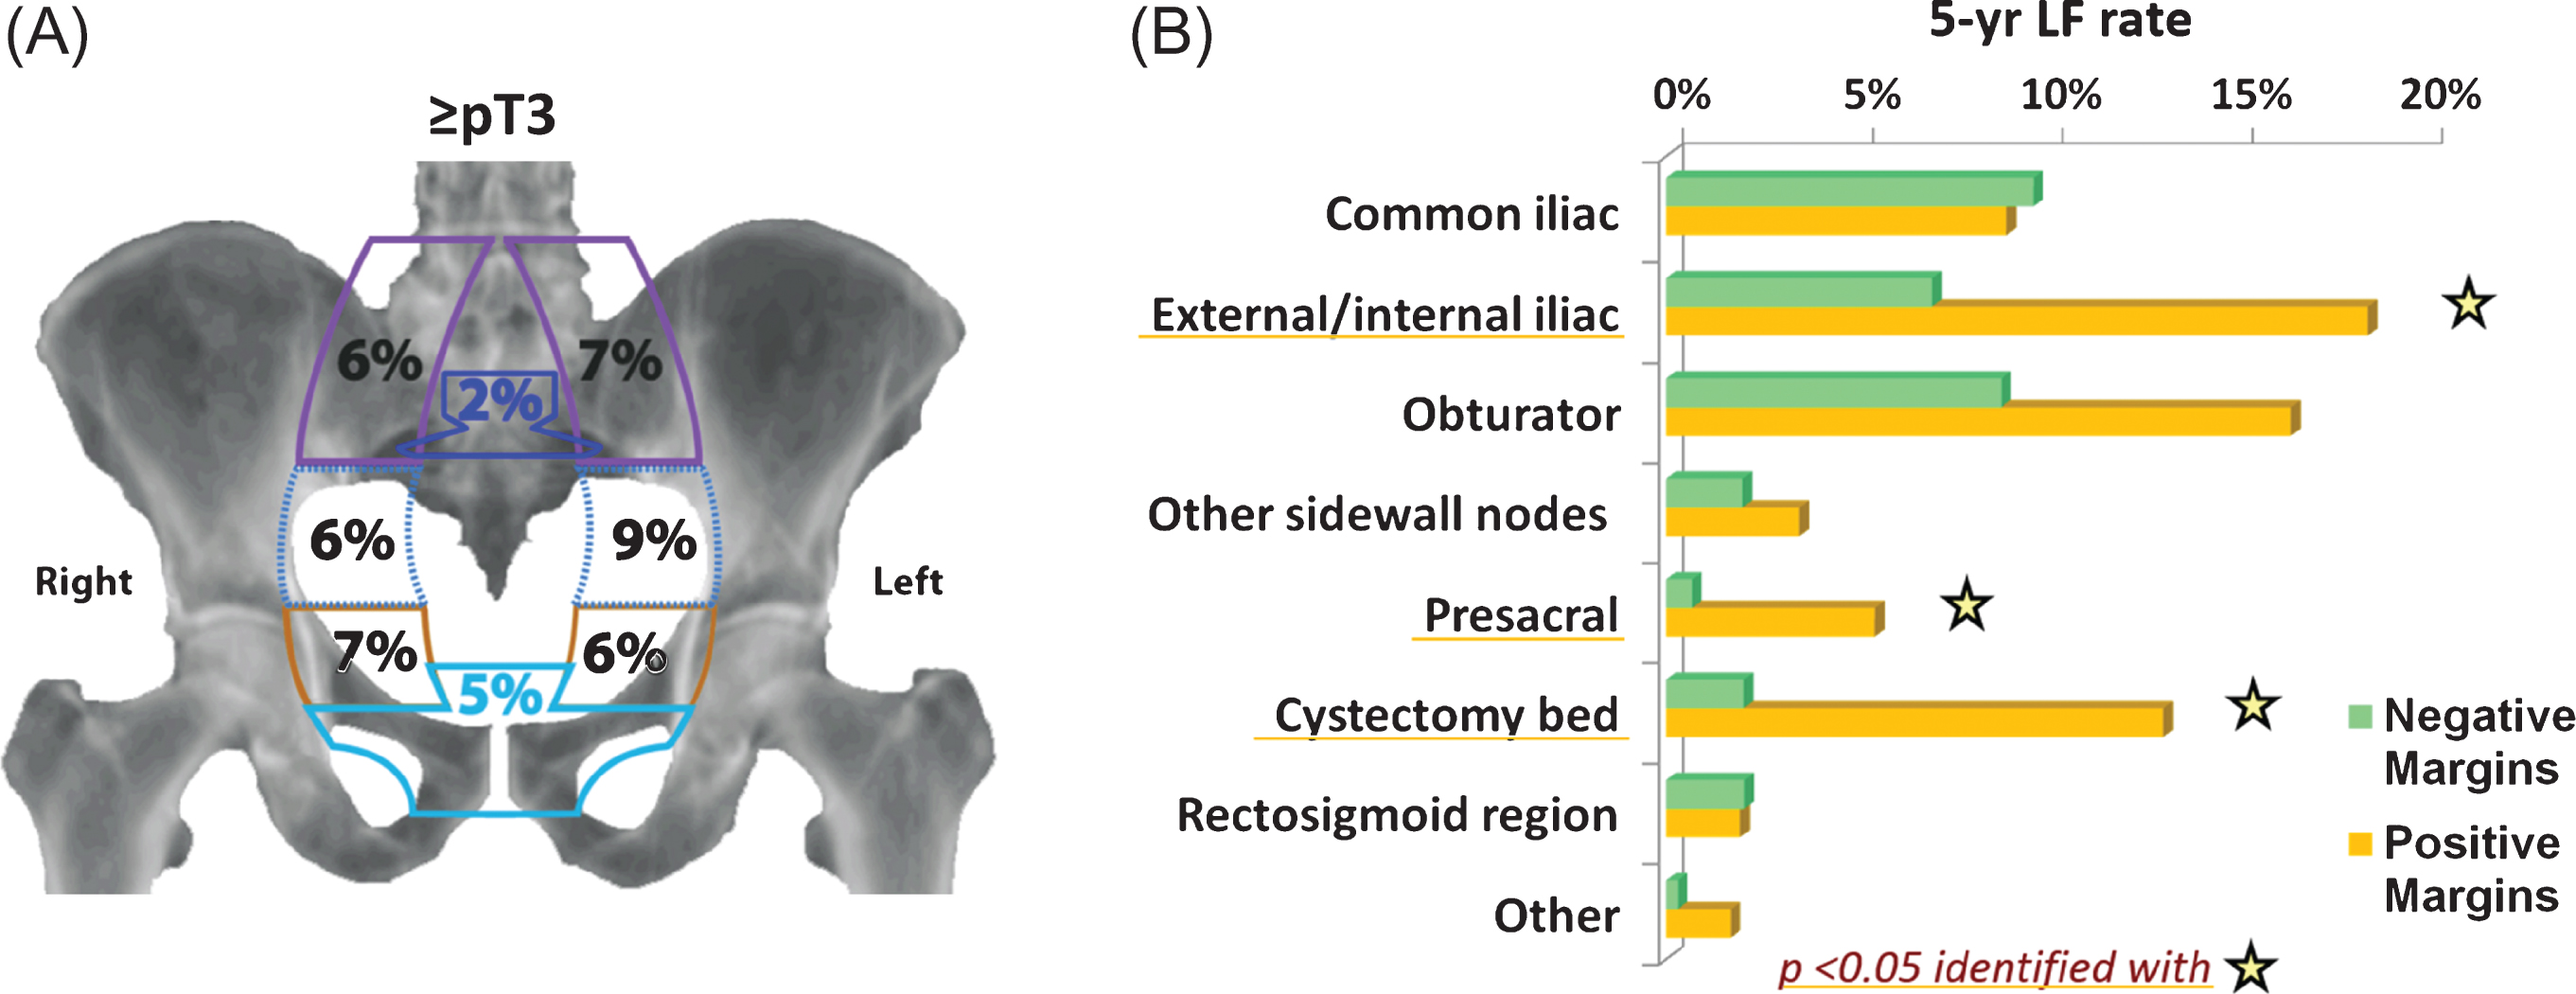 (A) Five year cumulative incidence of local-regional failure by location of recurrence for stage ≥pT3 patients. Local-regional failures were defined as recurrences in the pelvic lymph nodes or soft tissues before or within 3 months of evidence of distant failure. The pelvic sidewall nodes are the common iliac, external/internal iliac, and obturator nodes (from top to bottom). The structures in the middle of the pelvis are the presacral nodal region (superiorly) and the cystectomy bed. (B) Five year cumulative incidence of local-regional failure by site for ≥pT3 patients with positive vs. negative surgical margins.